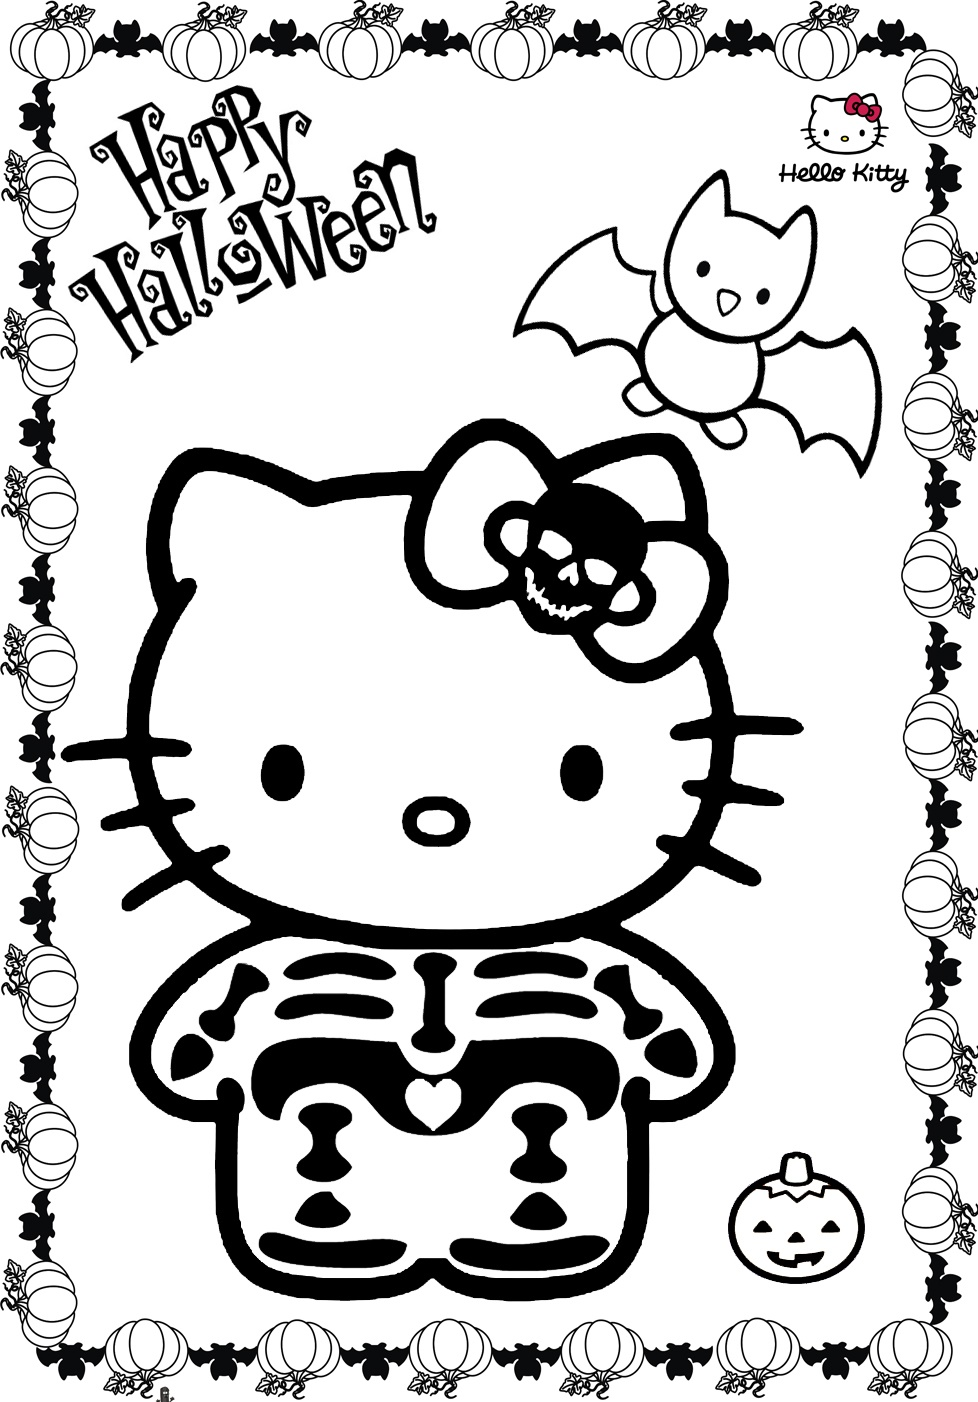 Hello kitty halloween coloring pages printable k worksheets hello kitty colouring pages hello kitty coloring kitty coloring